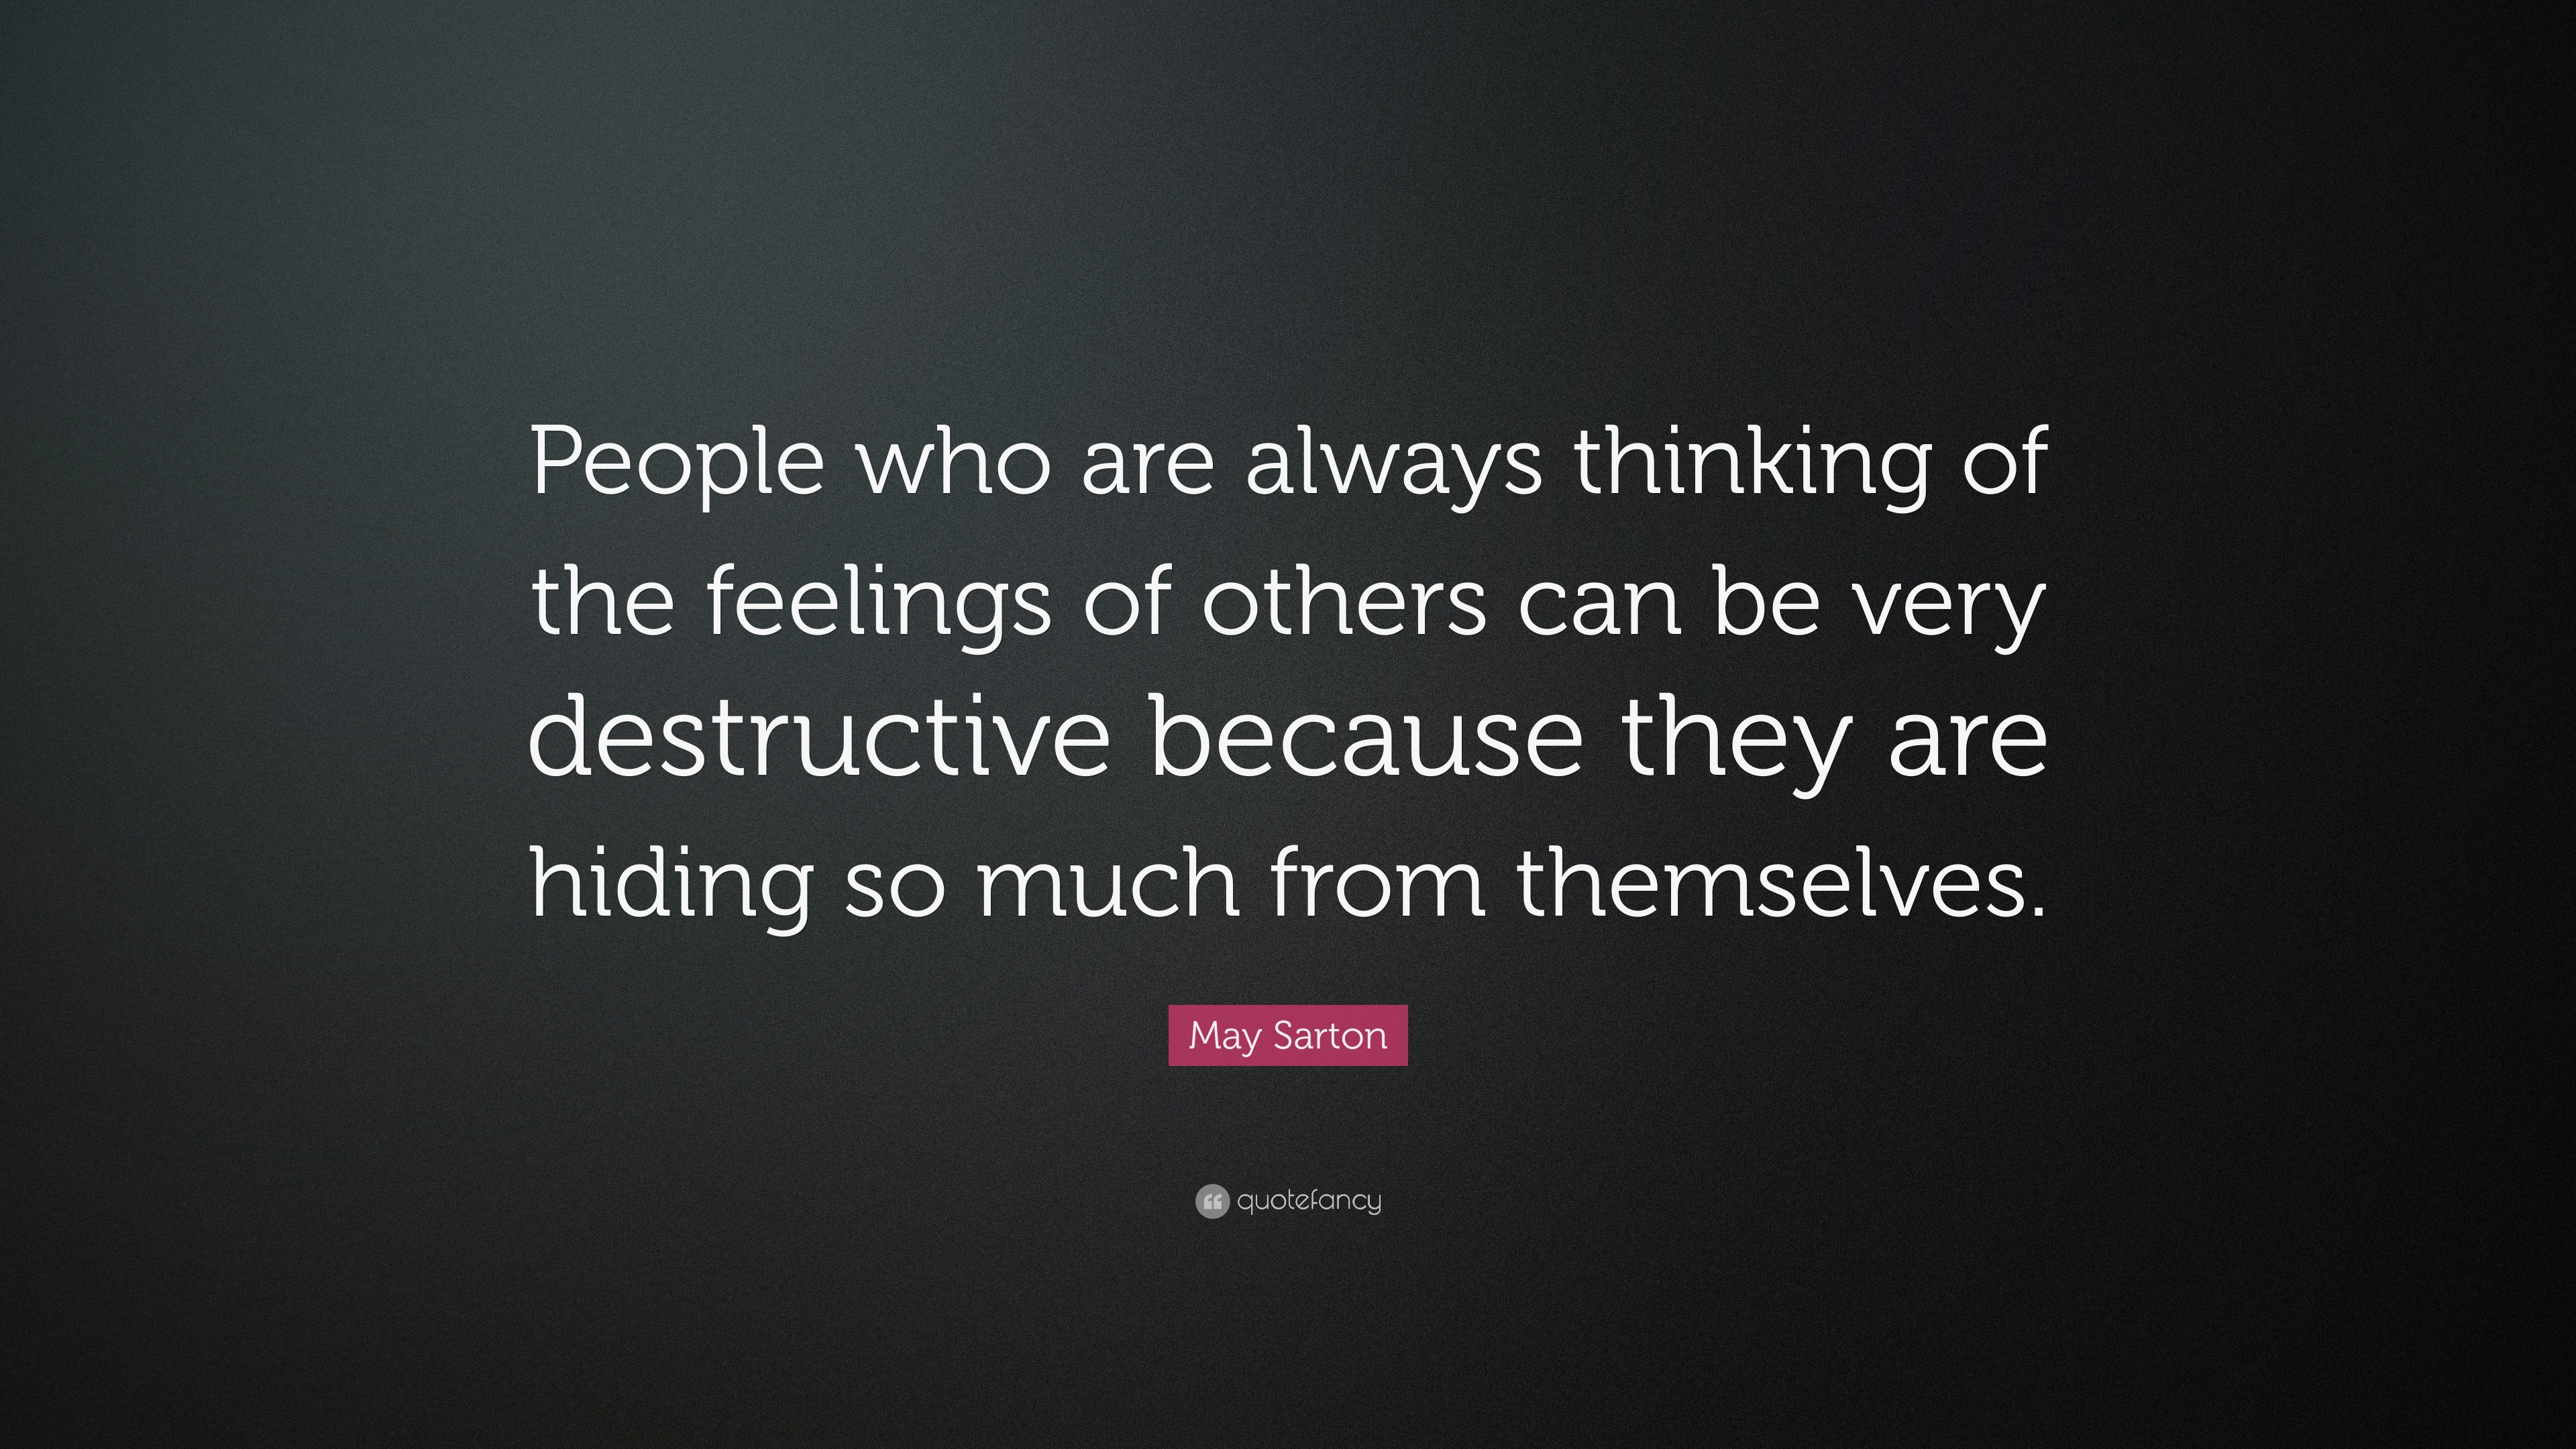 May Sarton Quote: “People who are always thinking of the feelings of ...